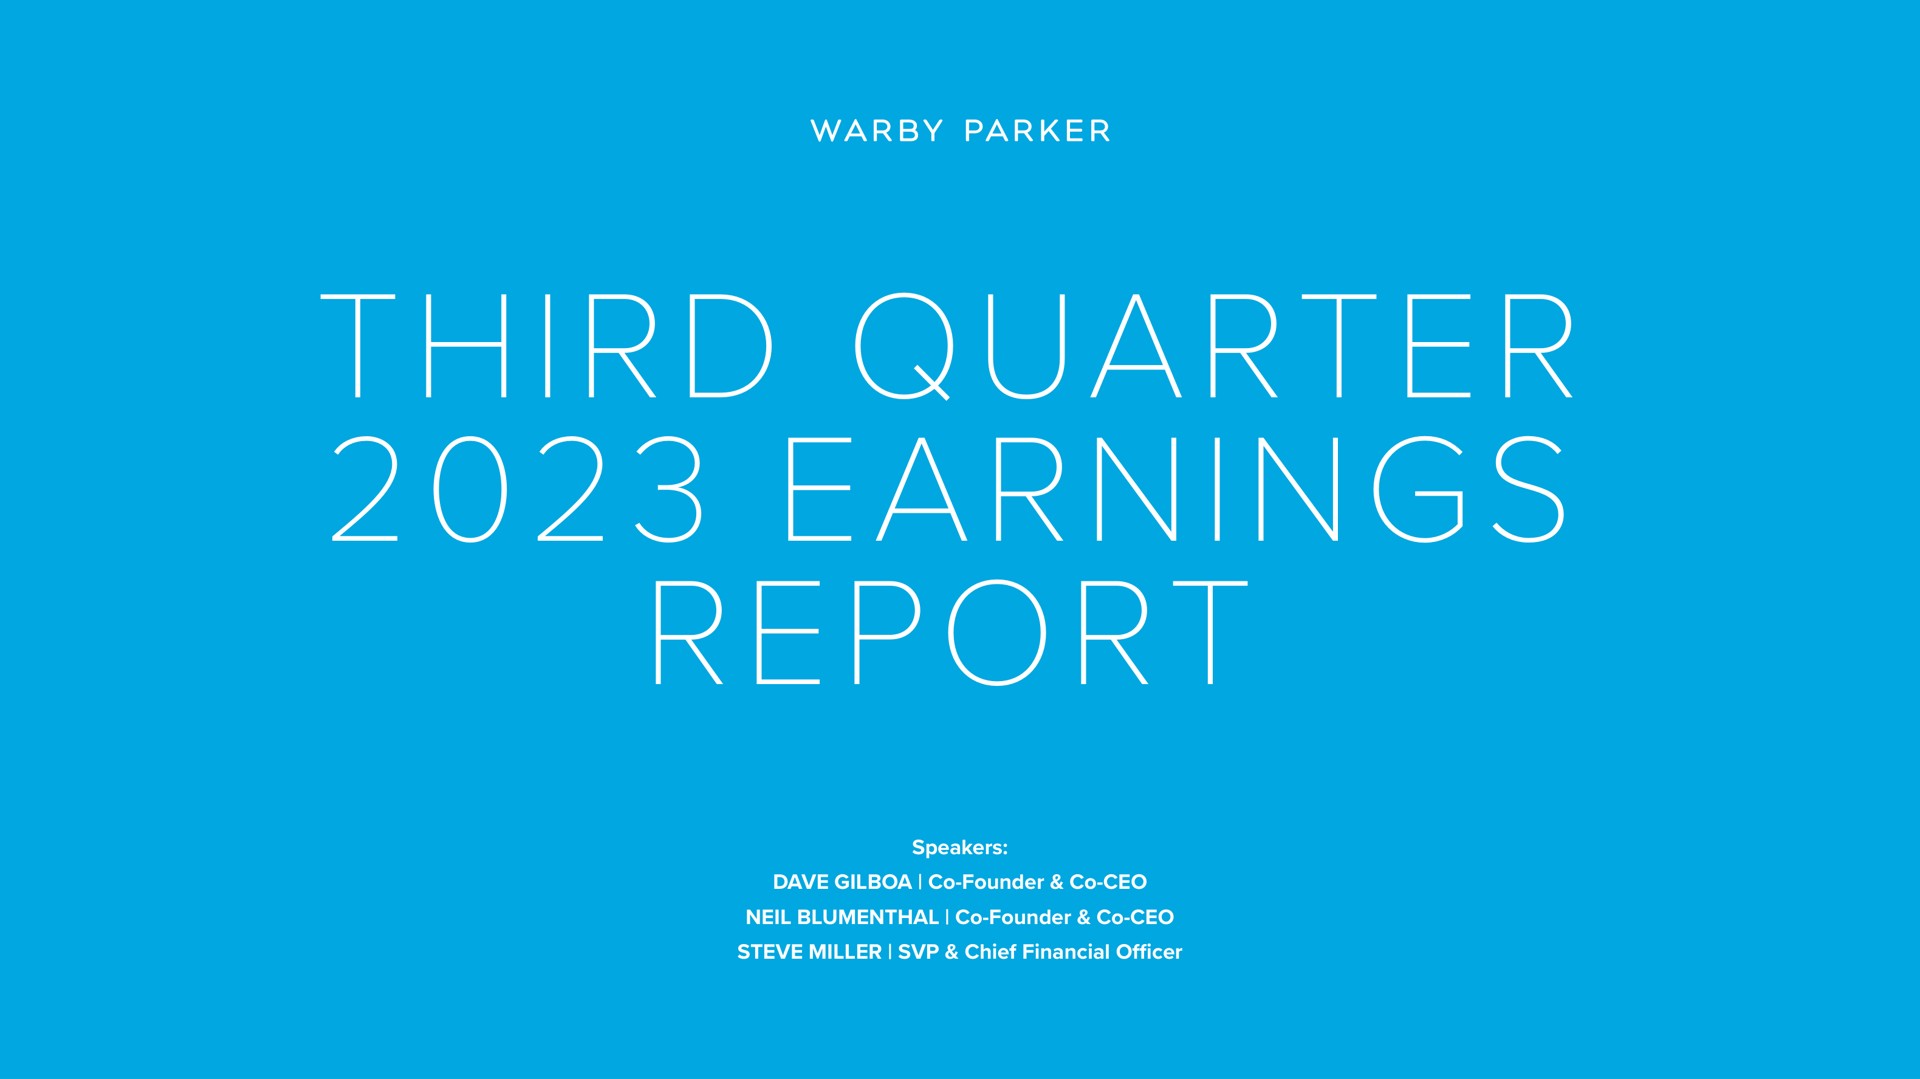 third quarter earnings report parker iao pac at nat i | Warby Parker